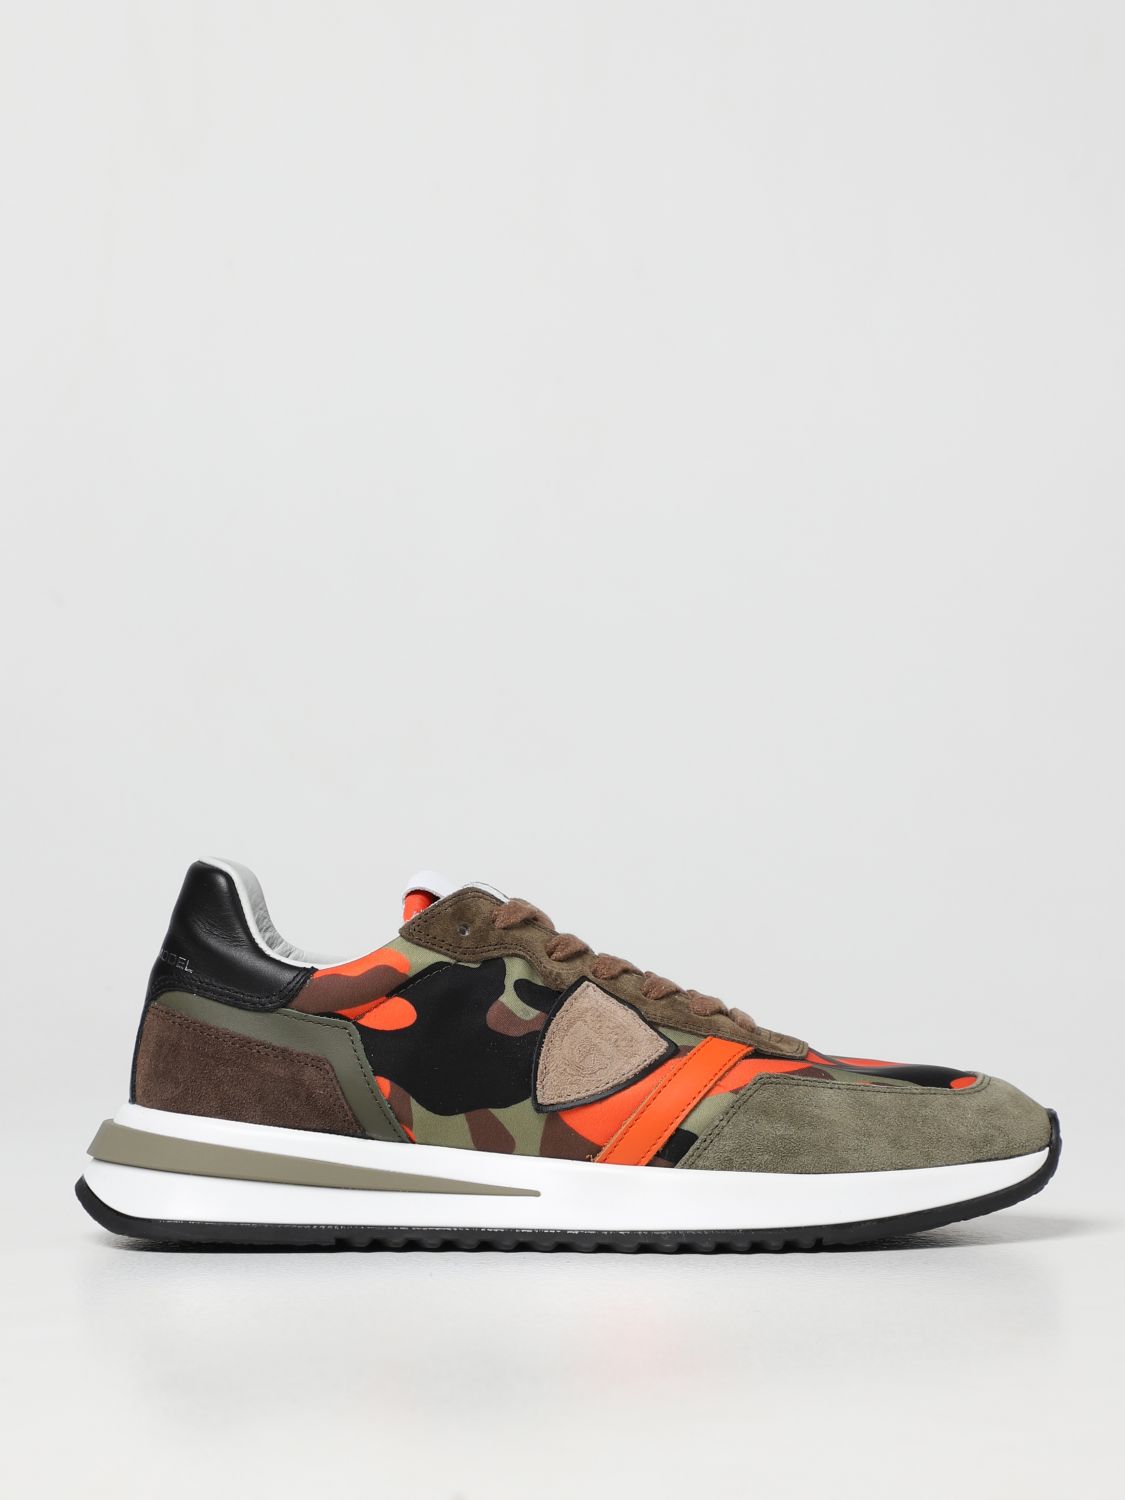 Philippe Model Tropez Trainers In Camouflage Nylon In Military | ModeSens